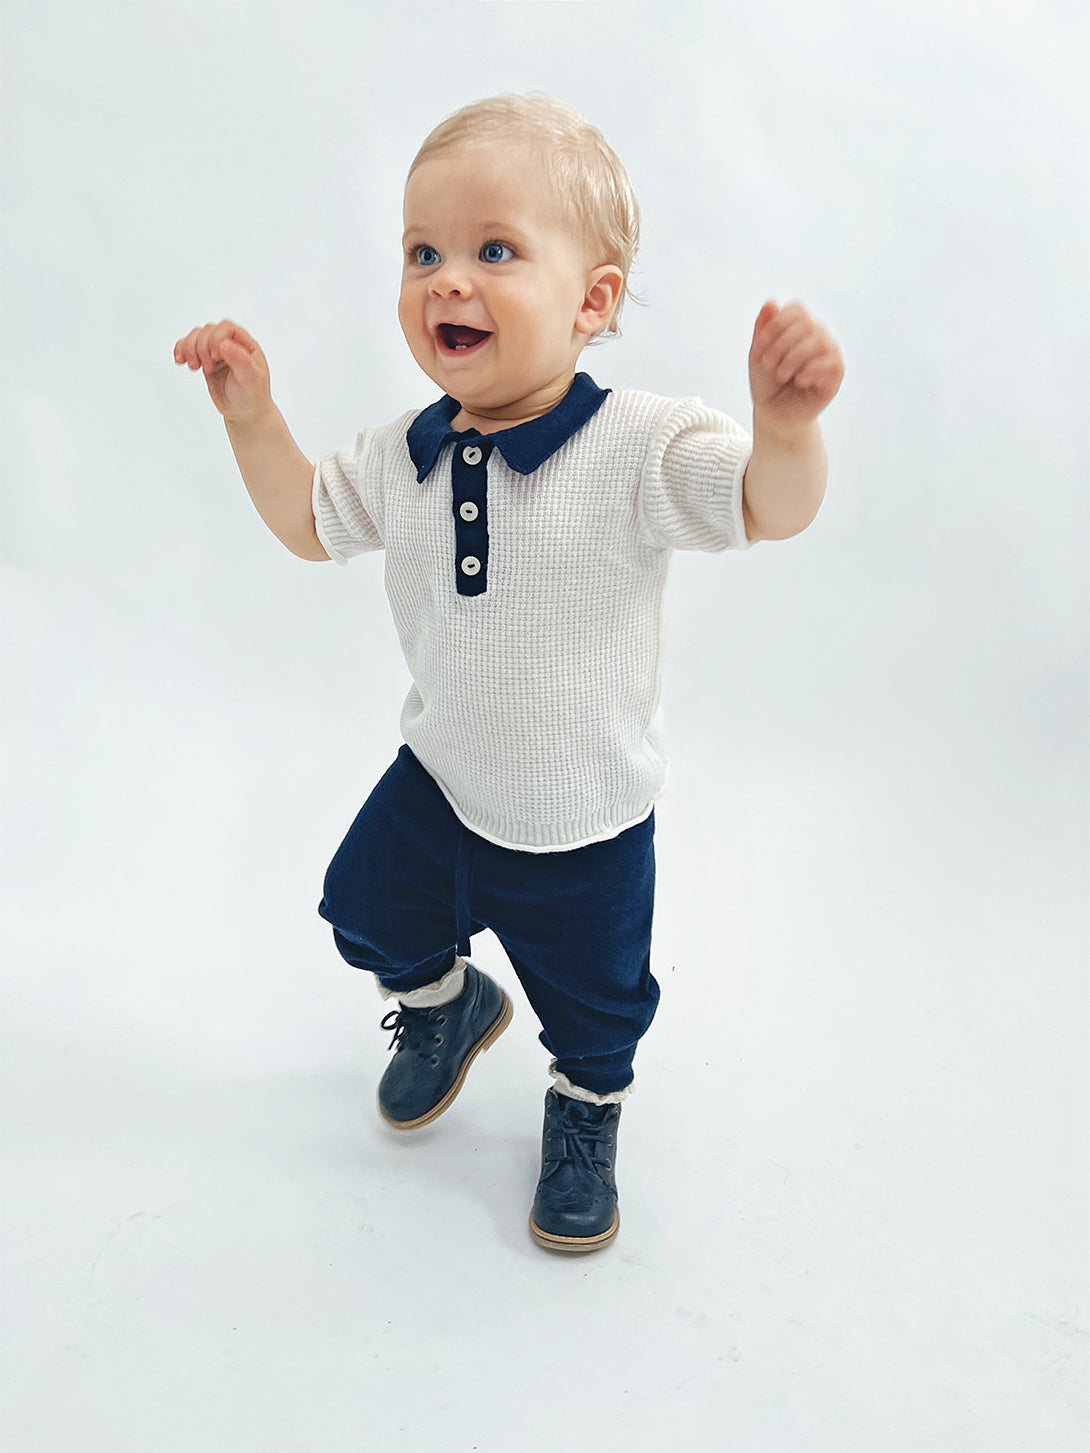 【AS WE GROW】【30%OFF】WEEKEND PANTS NAVY　ニットパンツ　18-36m,3-5y  | Coucoubebe/ククベベ